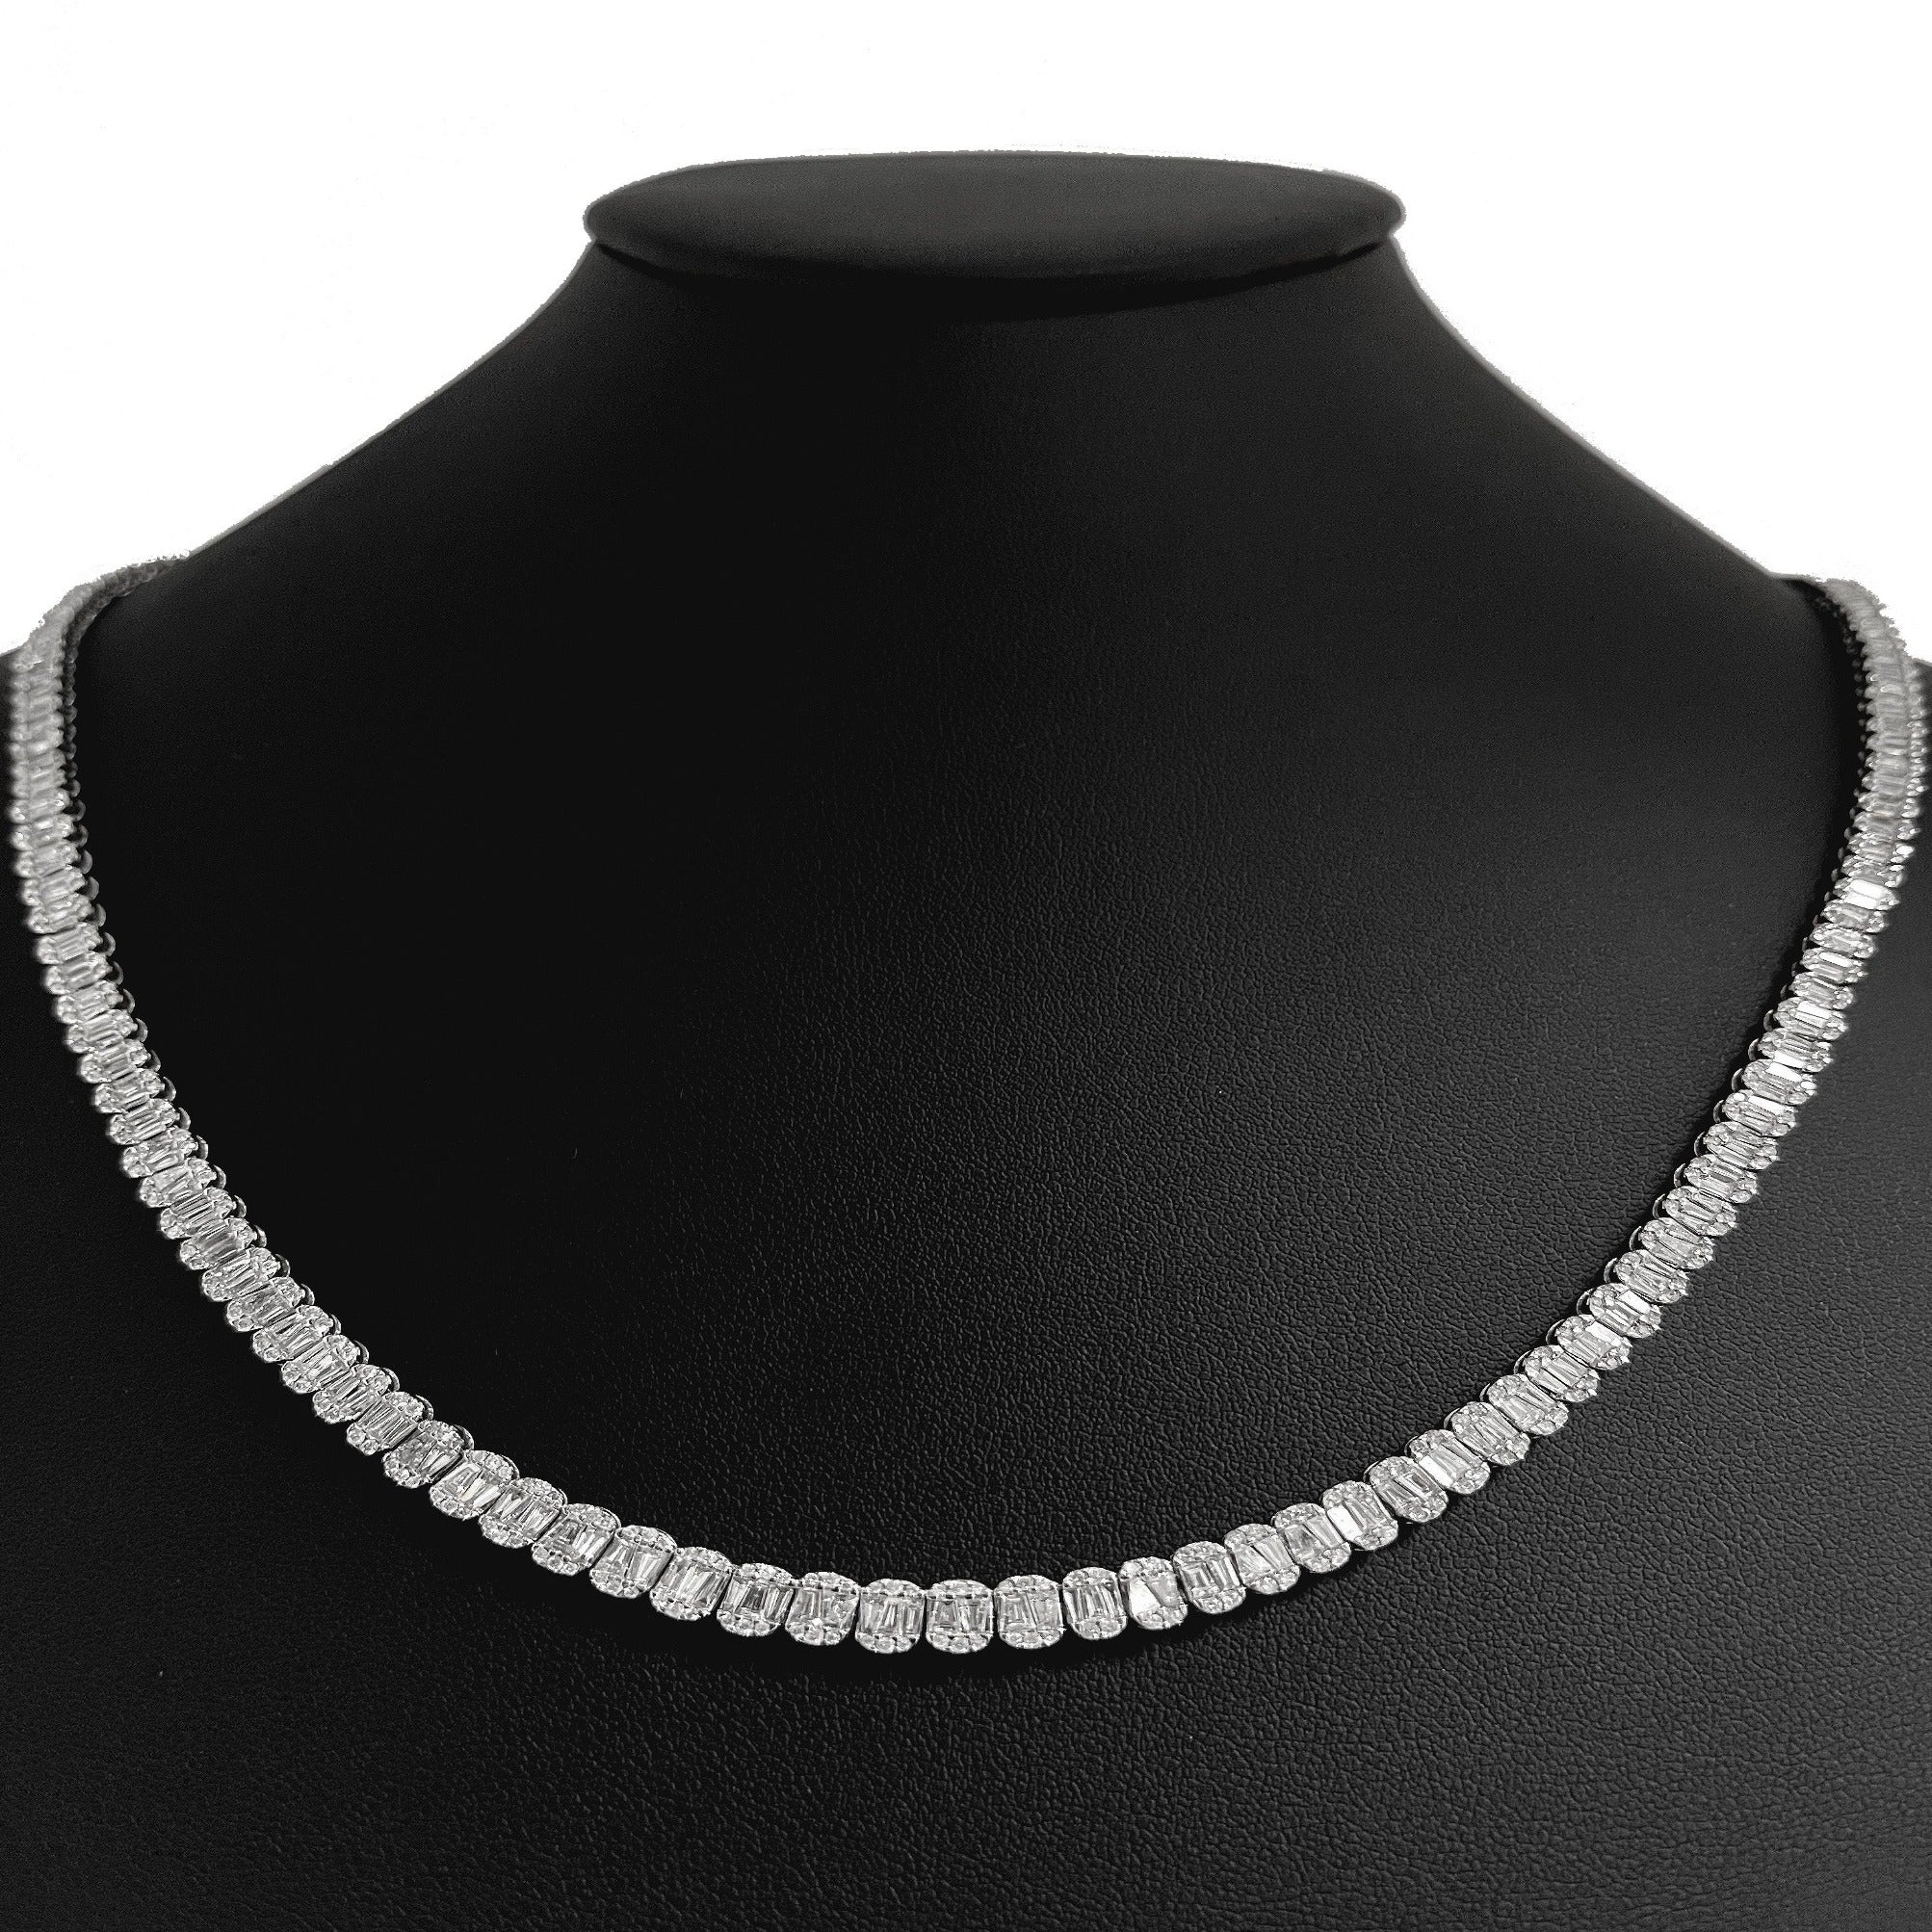 ''SPECIAL! 11.55ct G SI 14K White GOLD Round & Baguette Diamond Tennis Necklace 22'''' Long''